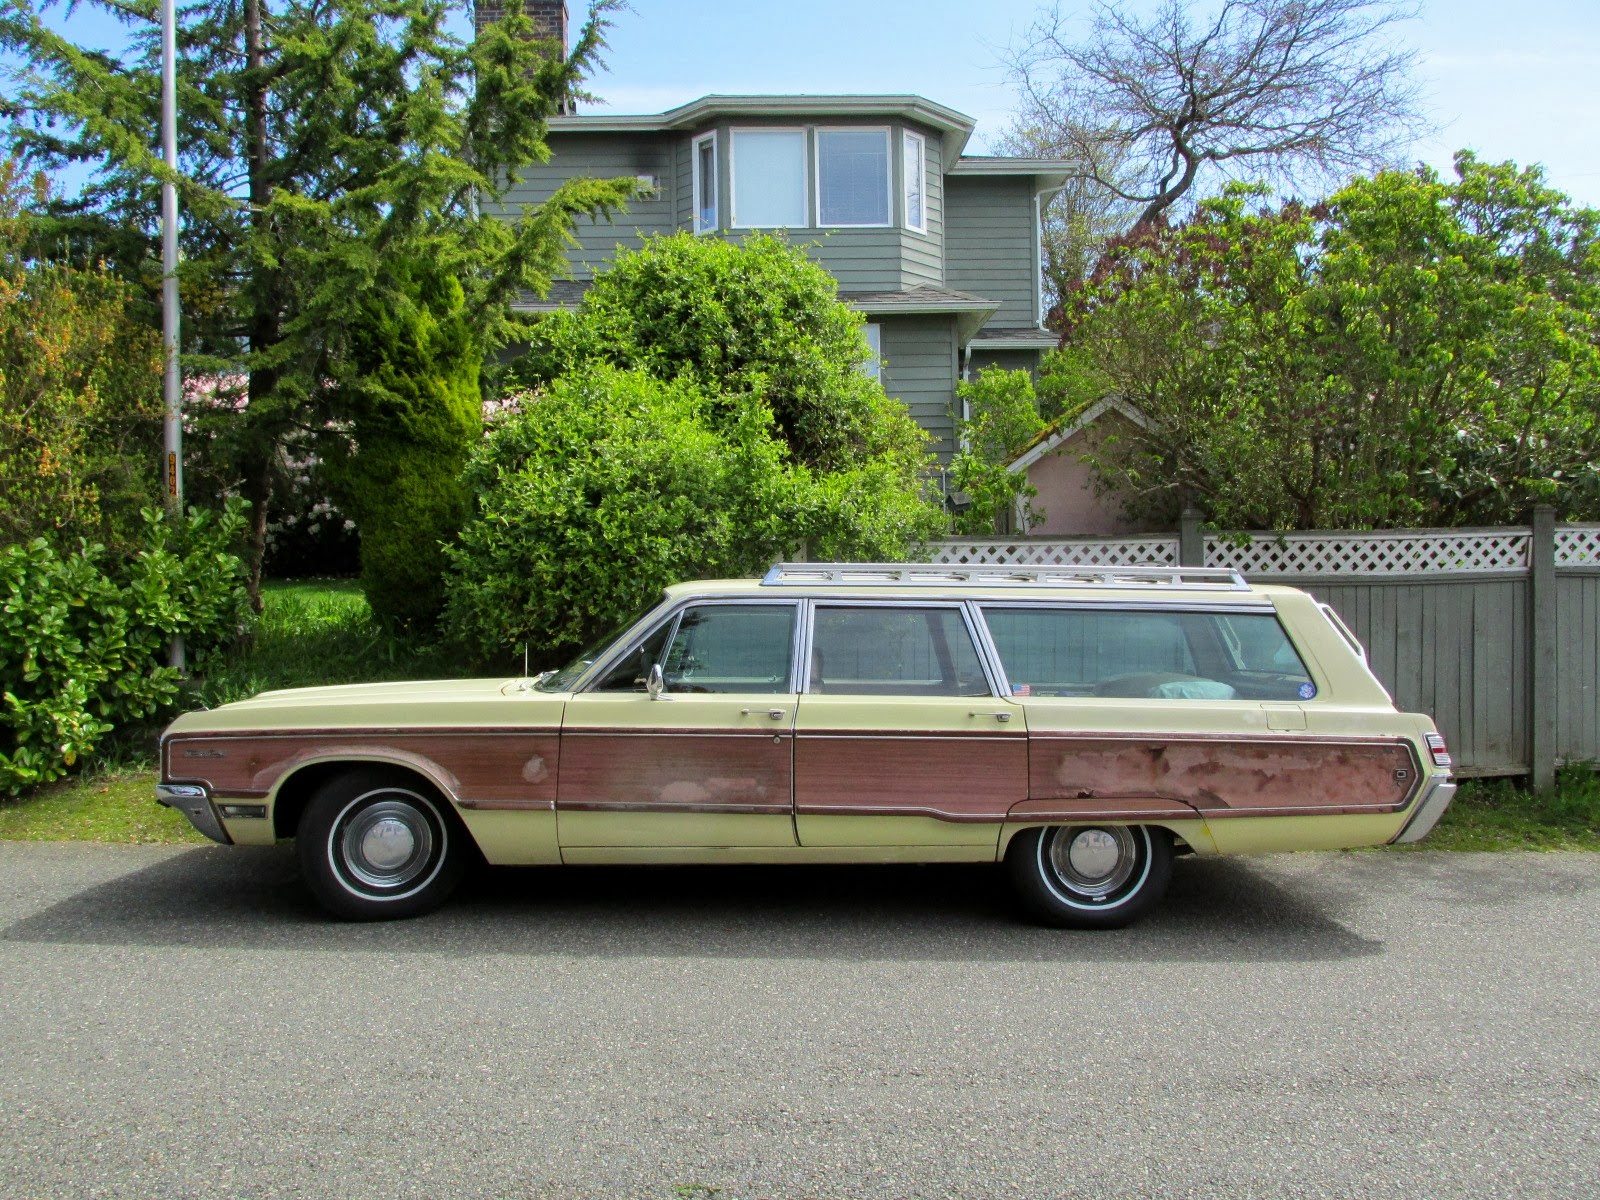 1968 Chrysler town and country station wagon